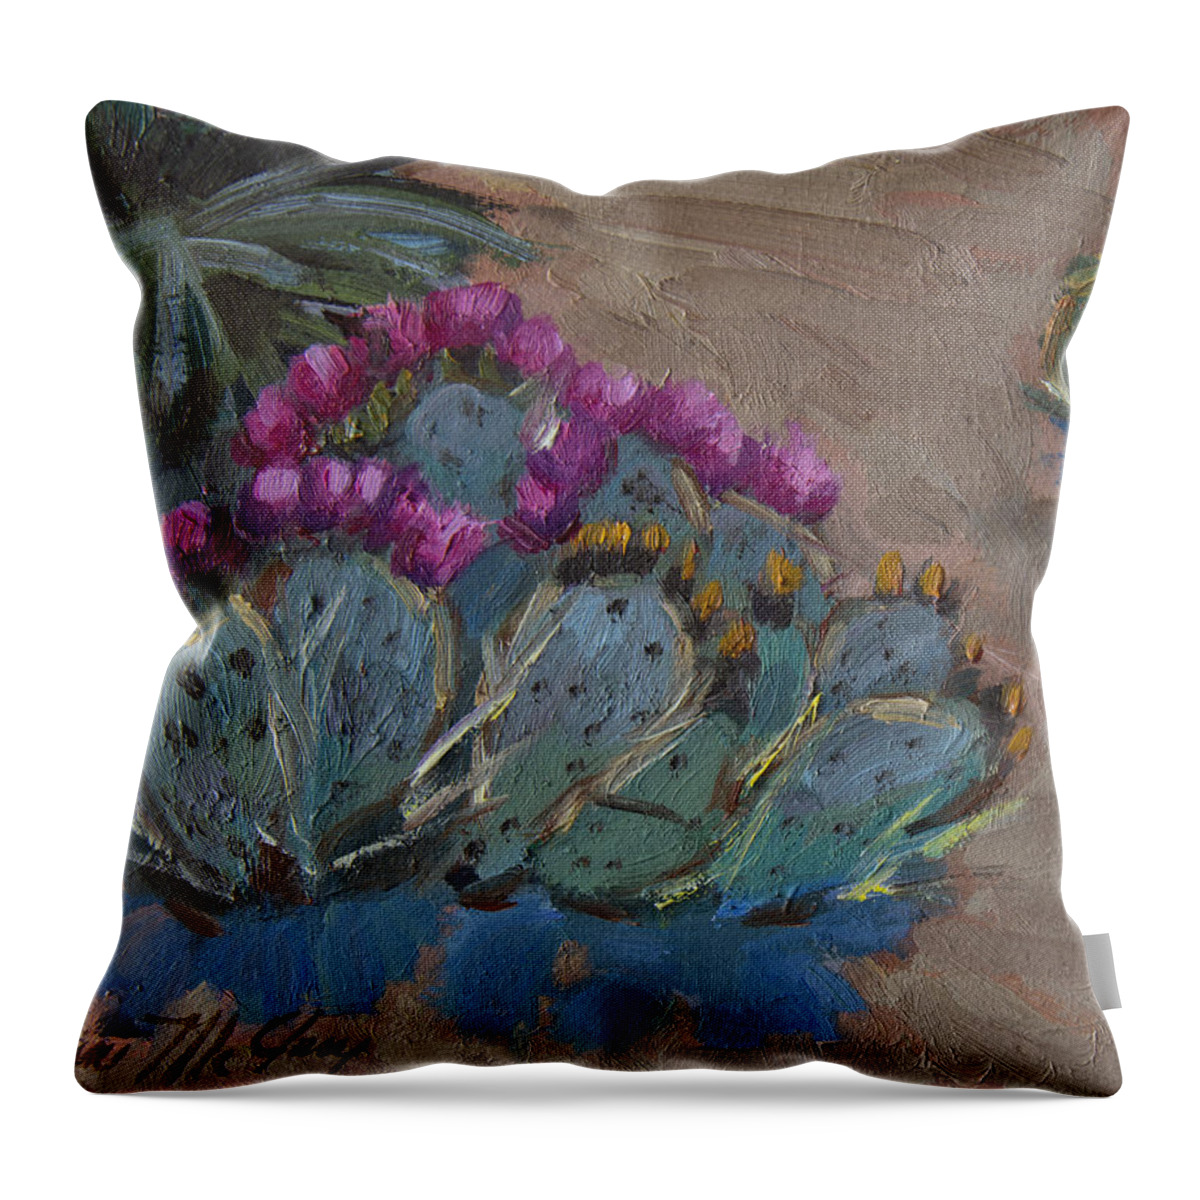 Cactus Throw Pillow featuring the painting Beavertail Cactus by Diane McClary